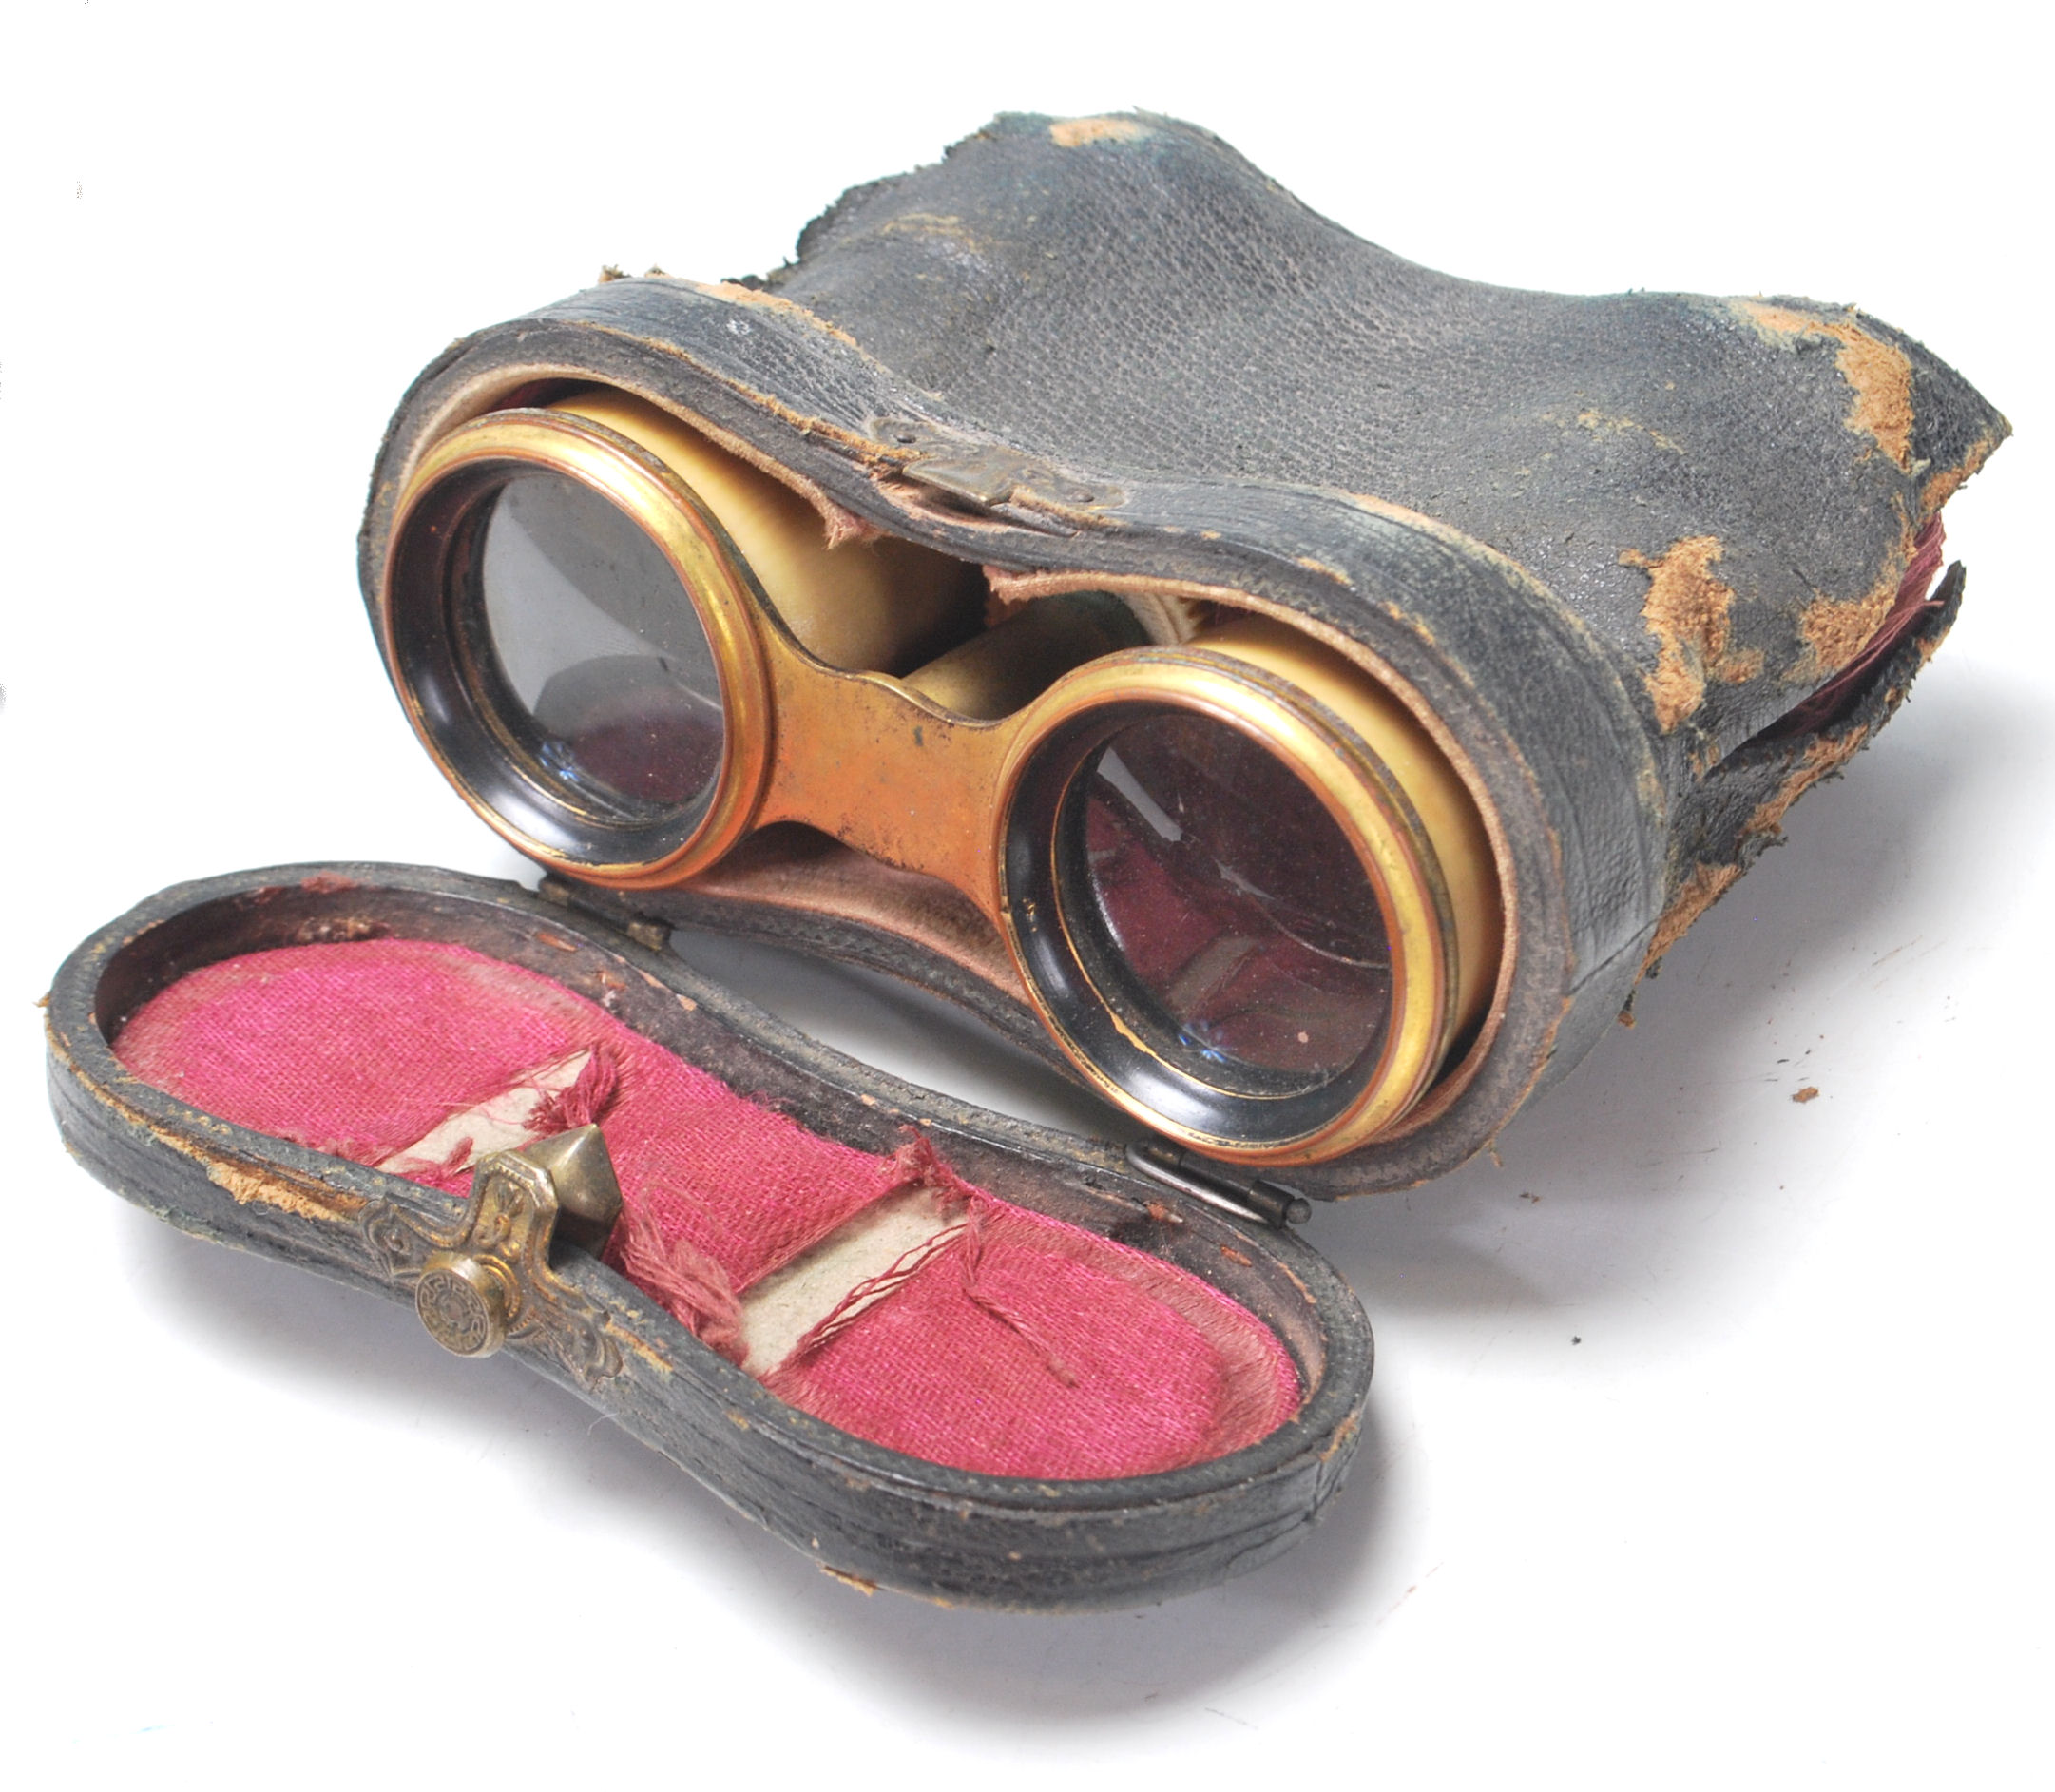 TWO ANTIQUE PAIRS OF ANTIQUE OPERA GLASSES - Image 8 of 8